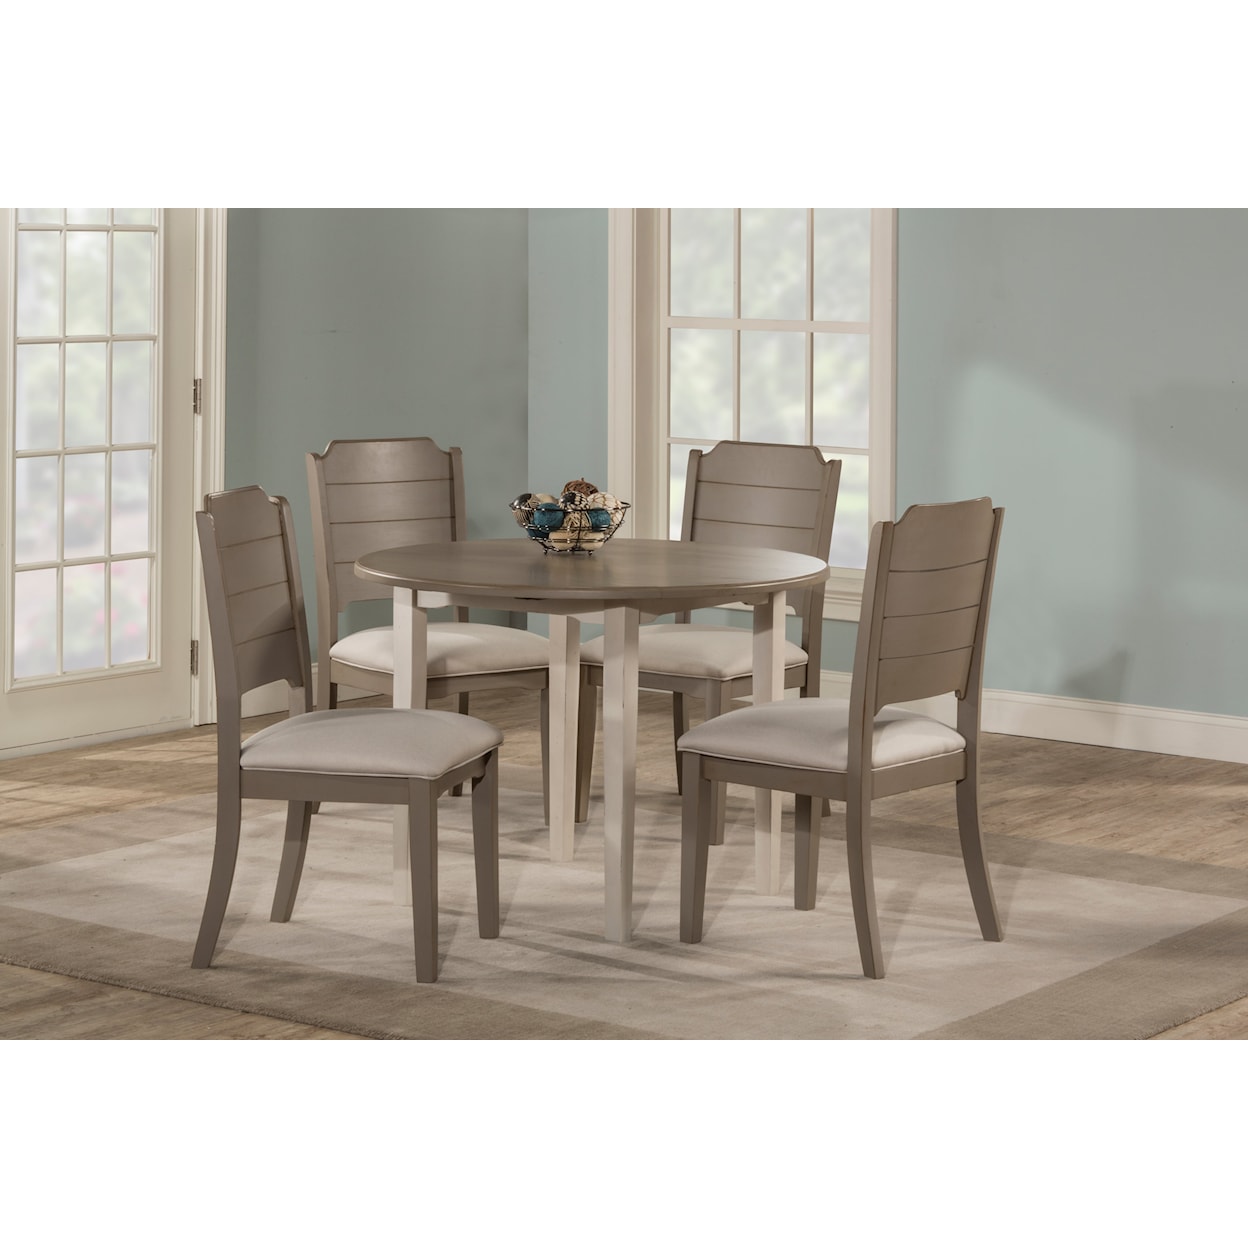 Hillsdale Clarion Dining Set